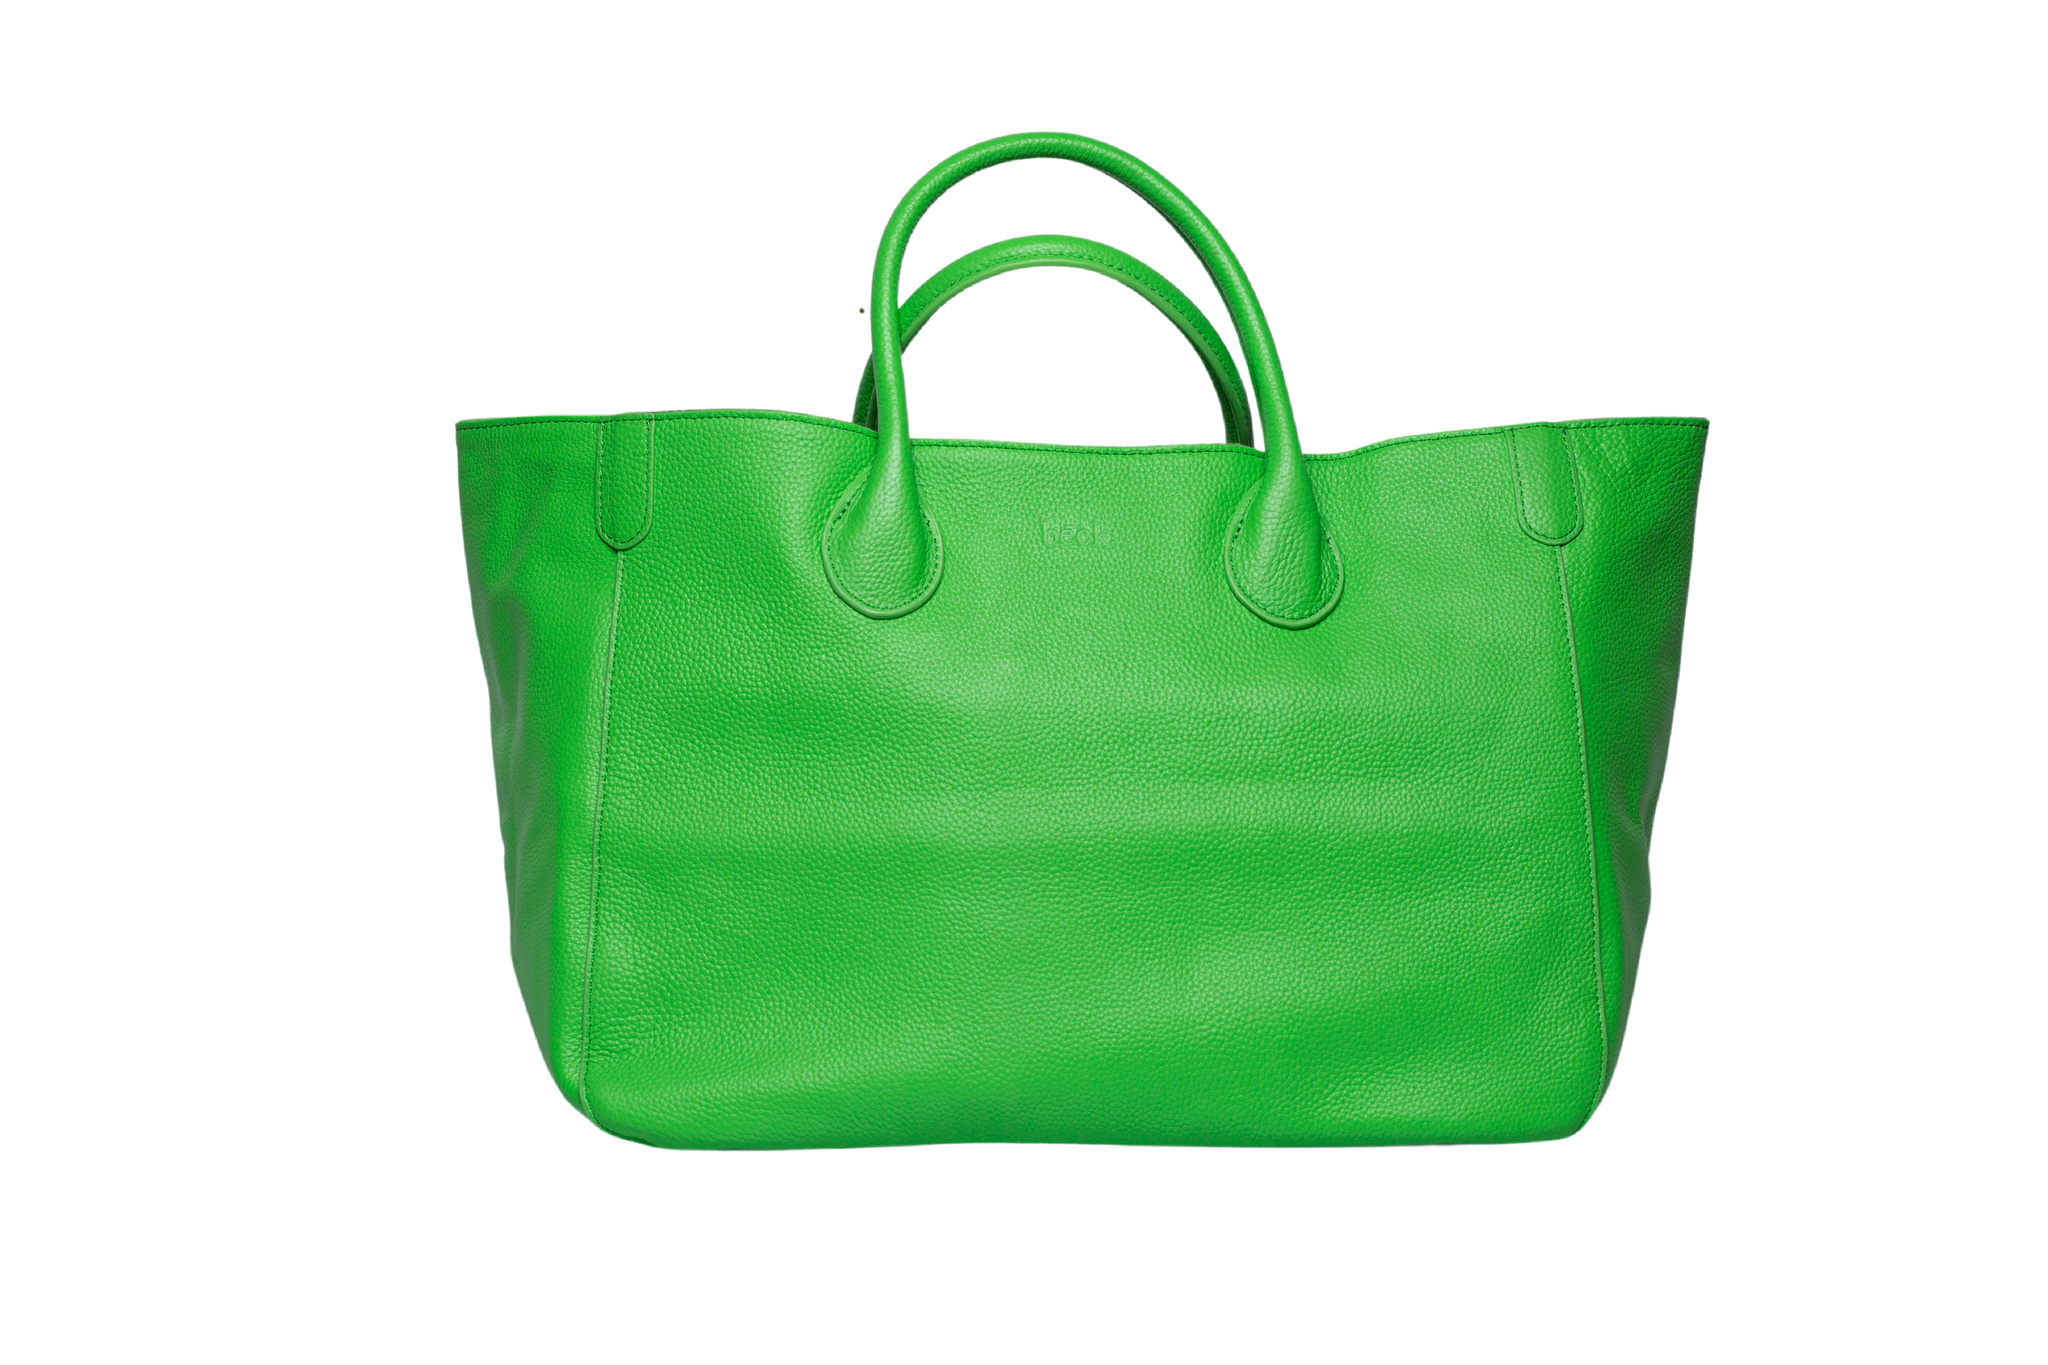 Beck Bright Green Pebbled Leather Open Top Rolled Handles Tote Bag